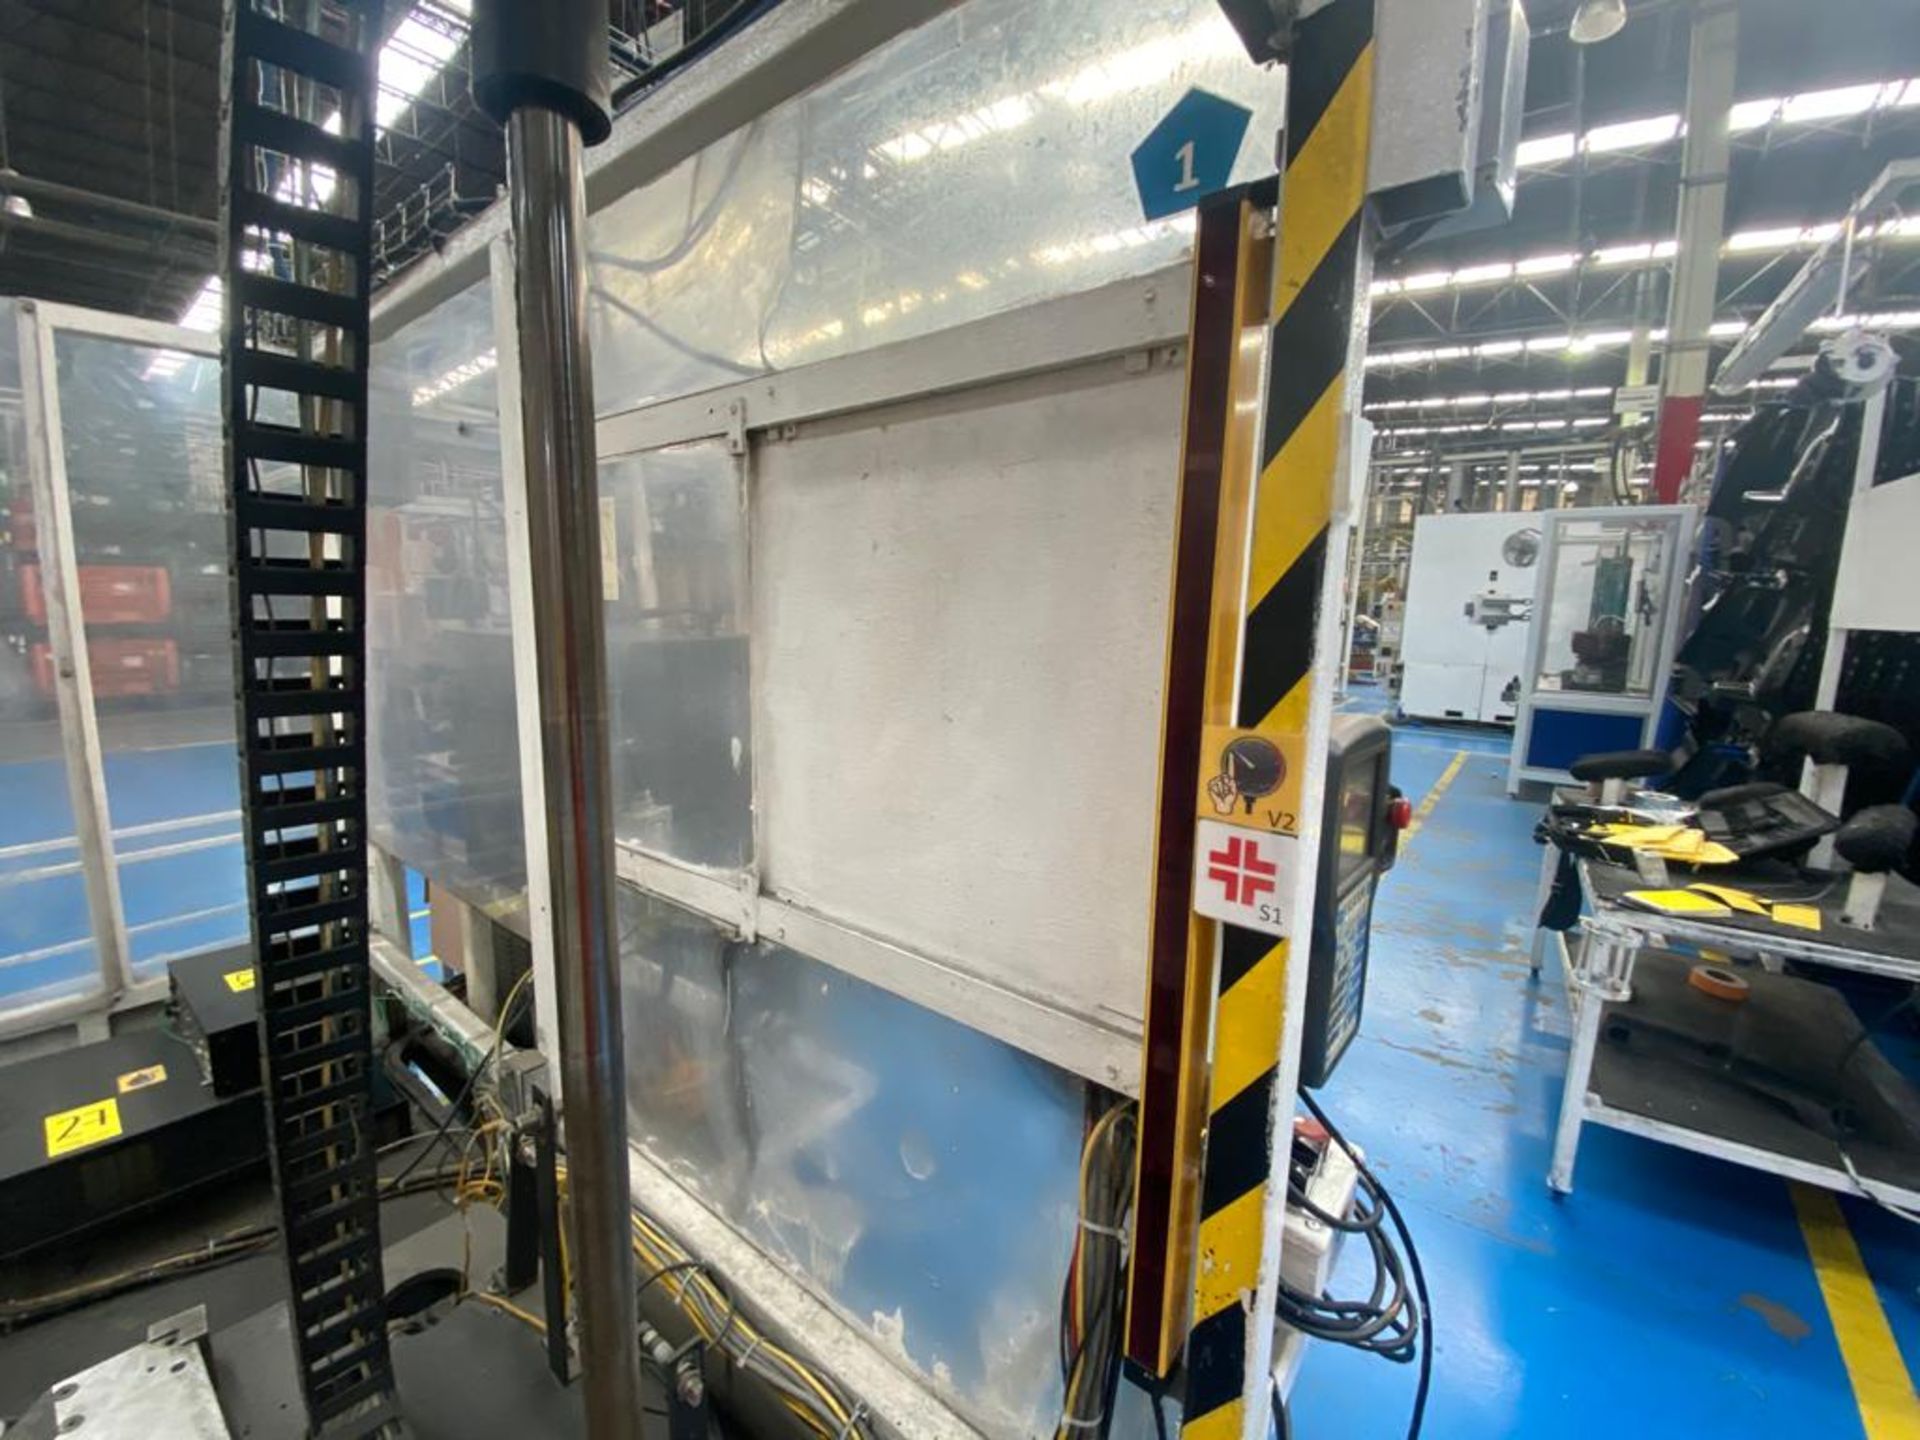 Welding cell in steel square profile structure, equipped with Fanuc articulated Robot, - Image 23 of 53